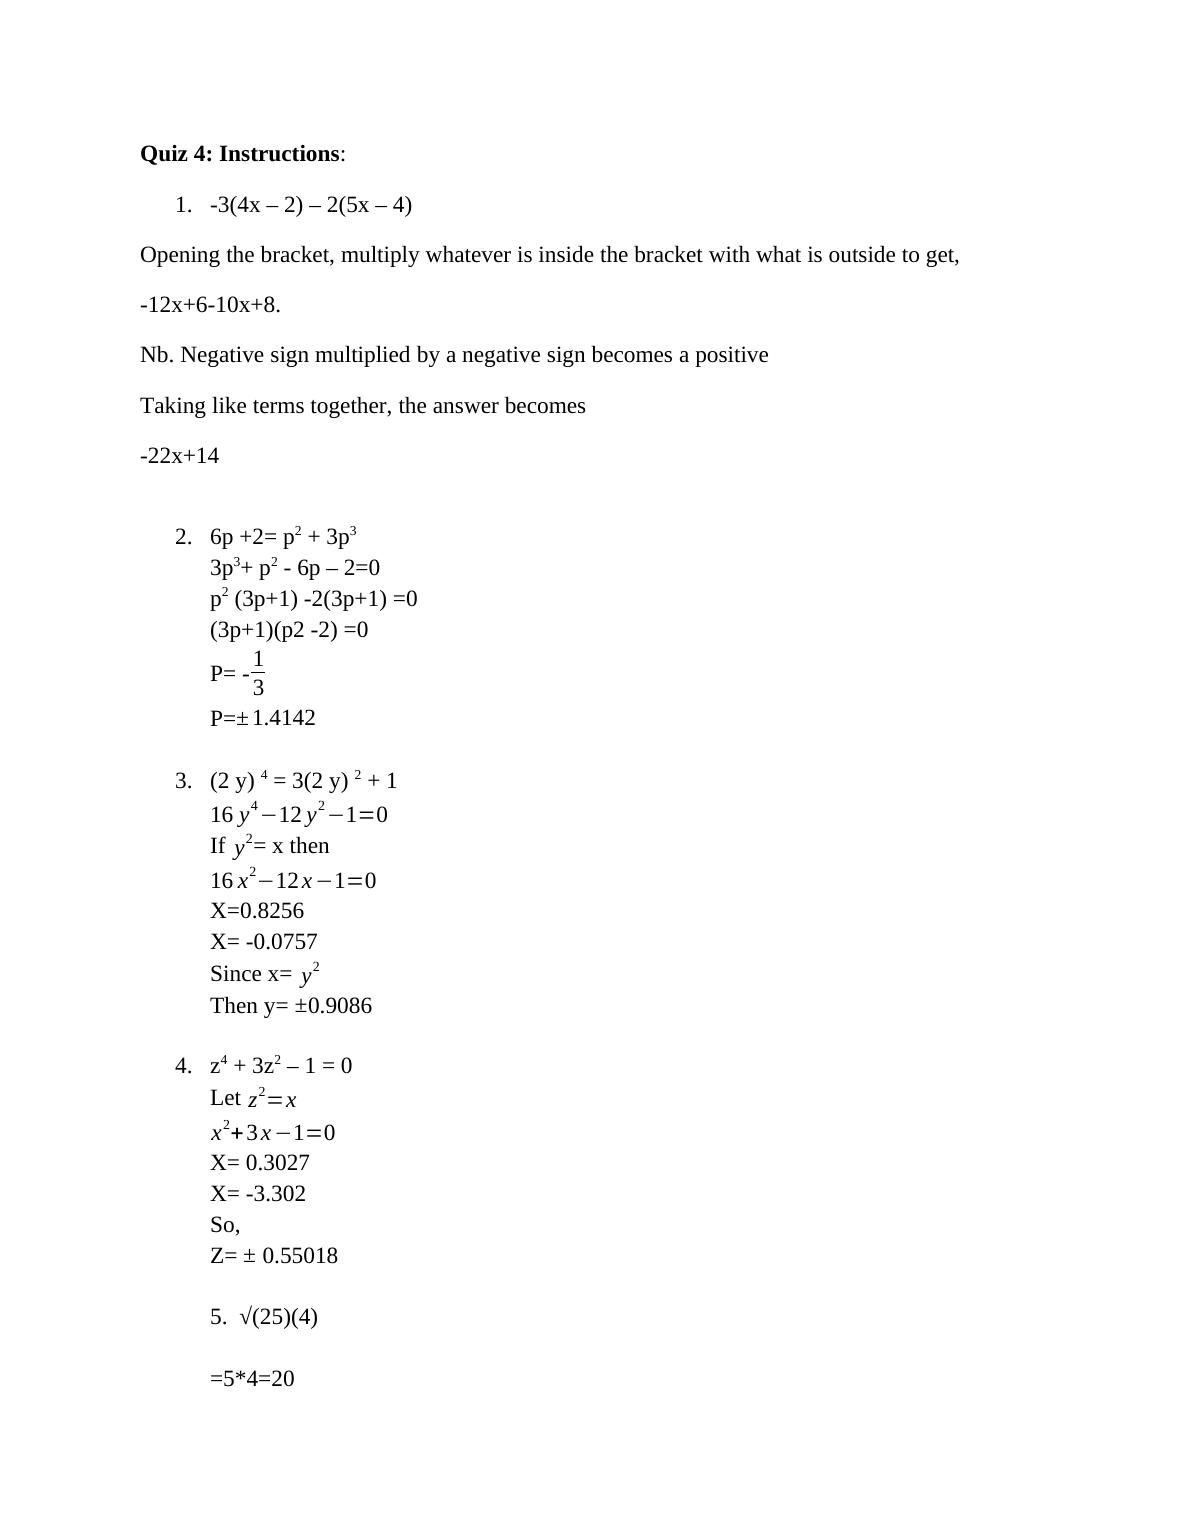 Quiz 4: Solve Math Problems and Equations_1